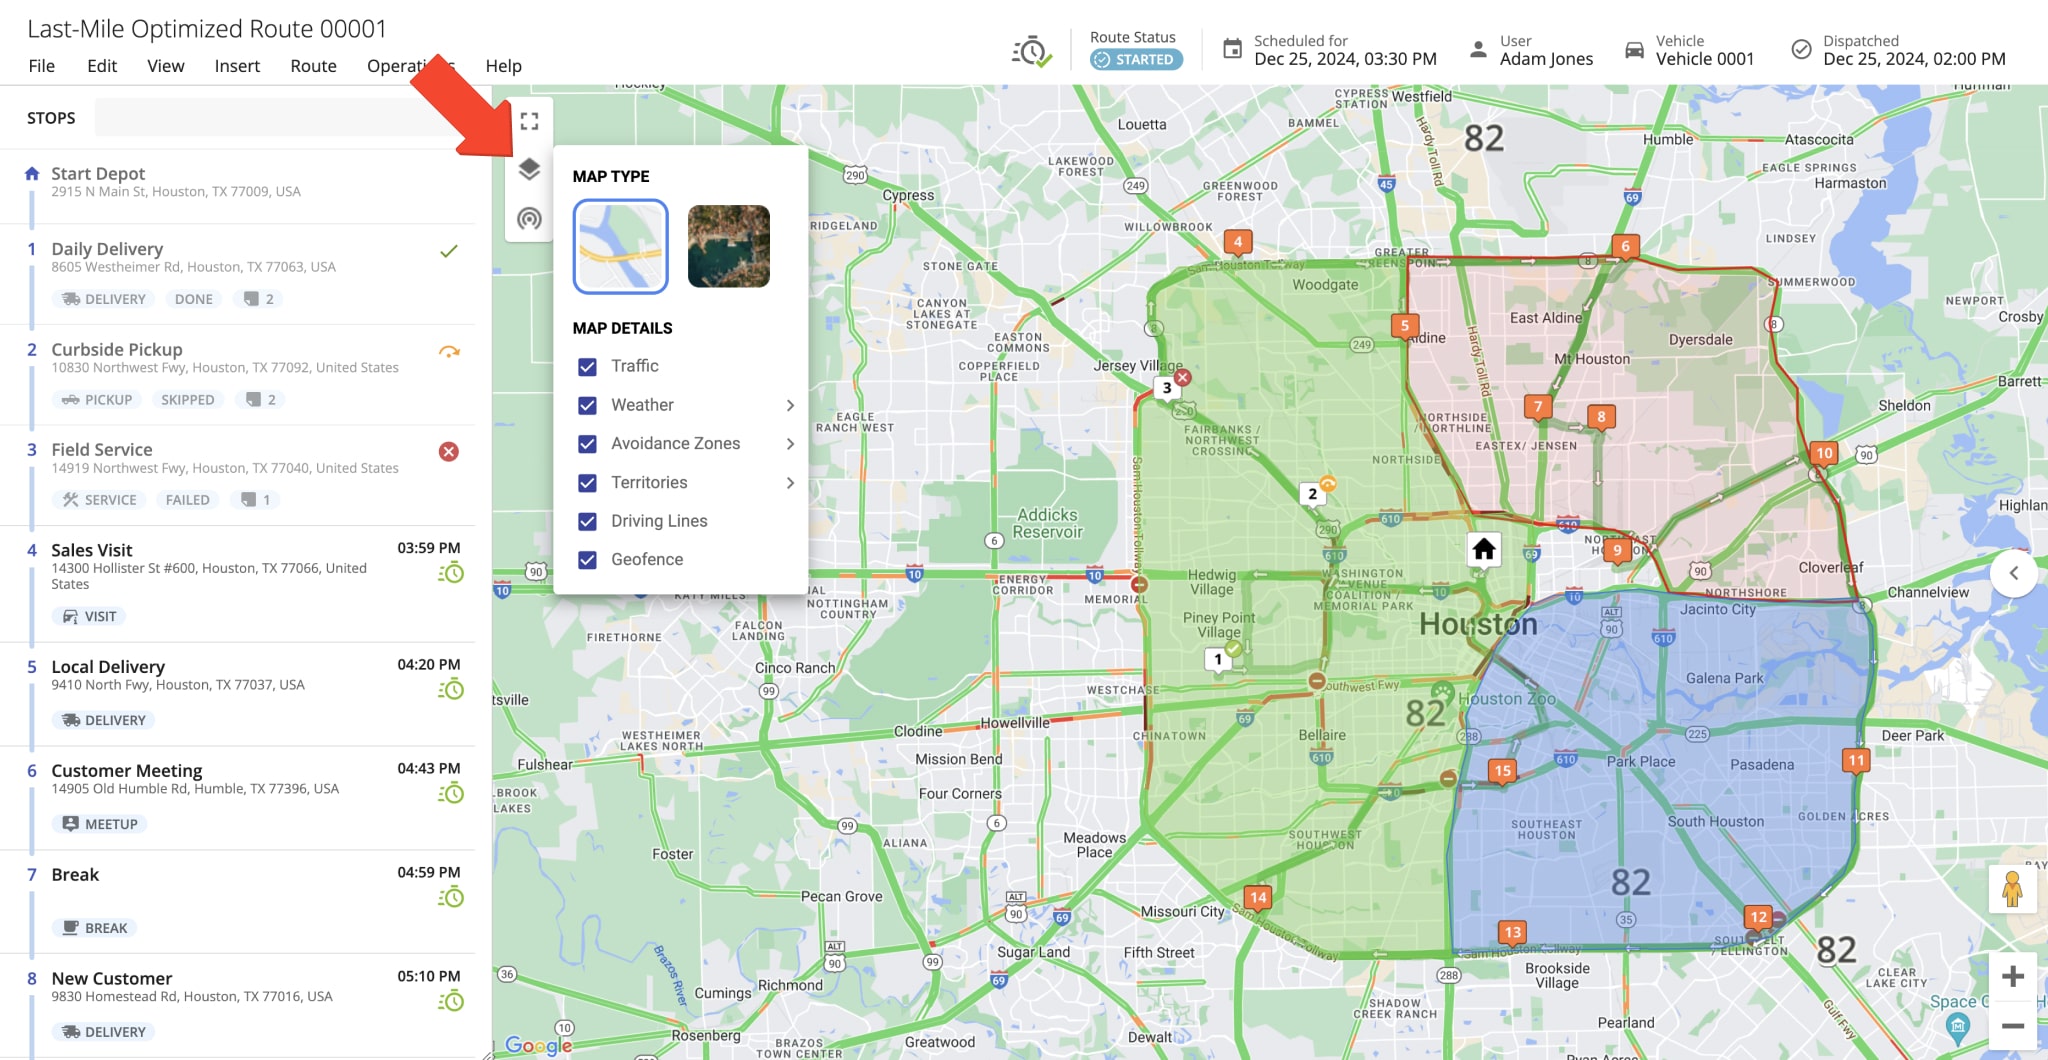 Interactive Map in Route Editor shows route stops, driving directions, satellite map view, address territories, avoidance zones, user GPS tracking, weather overlays, and more.